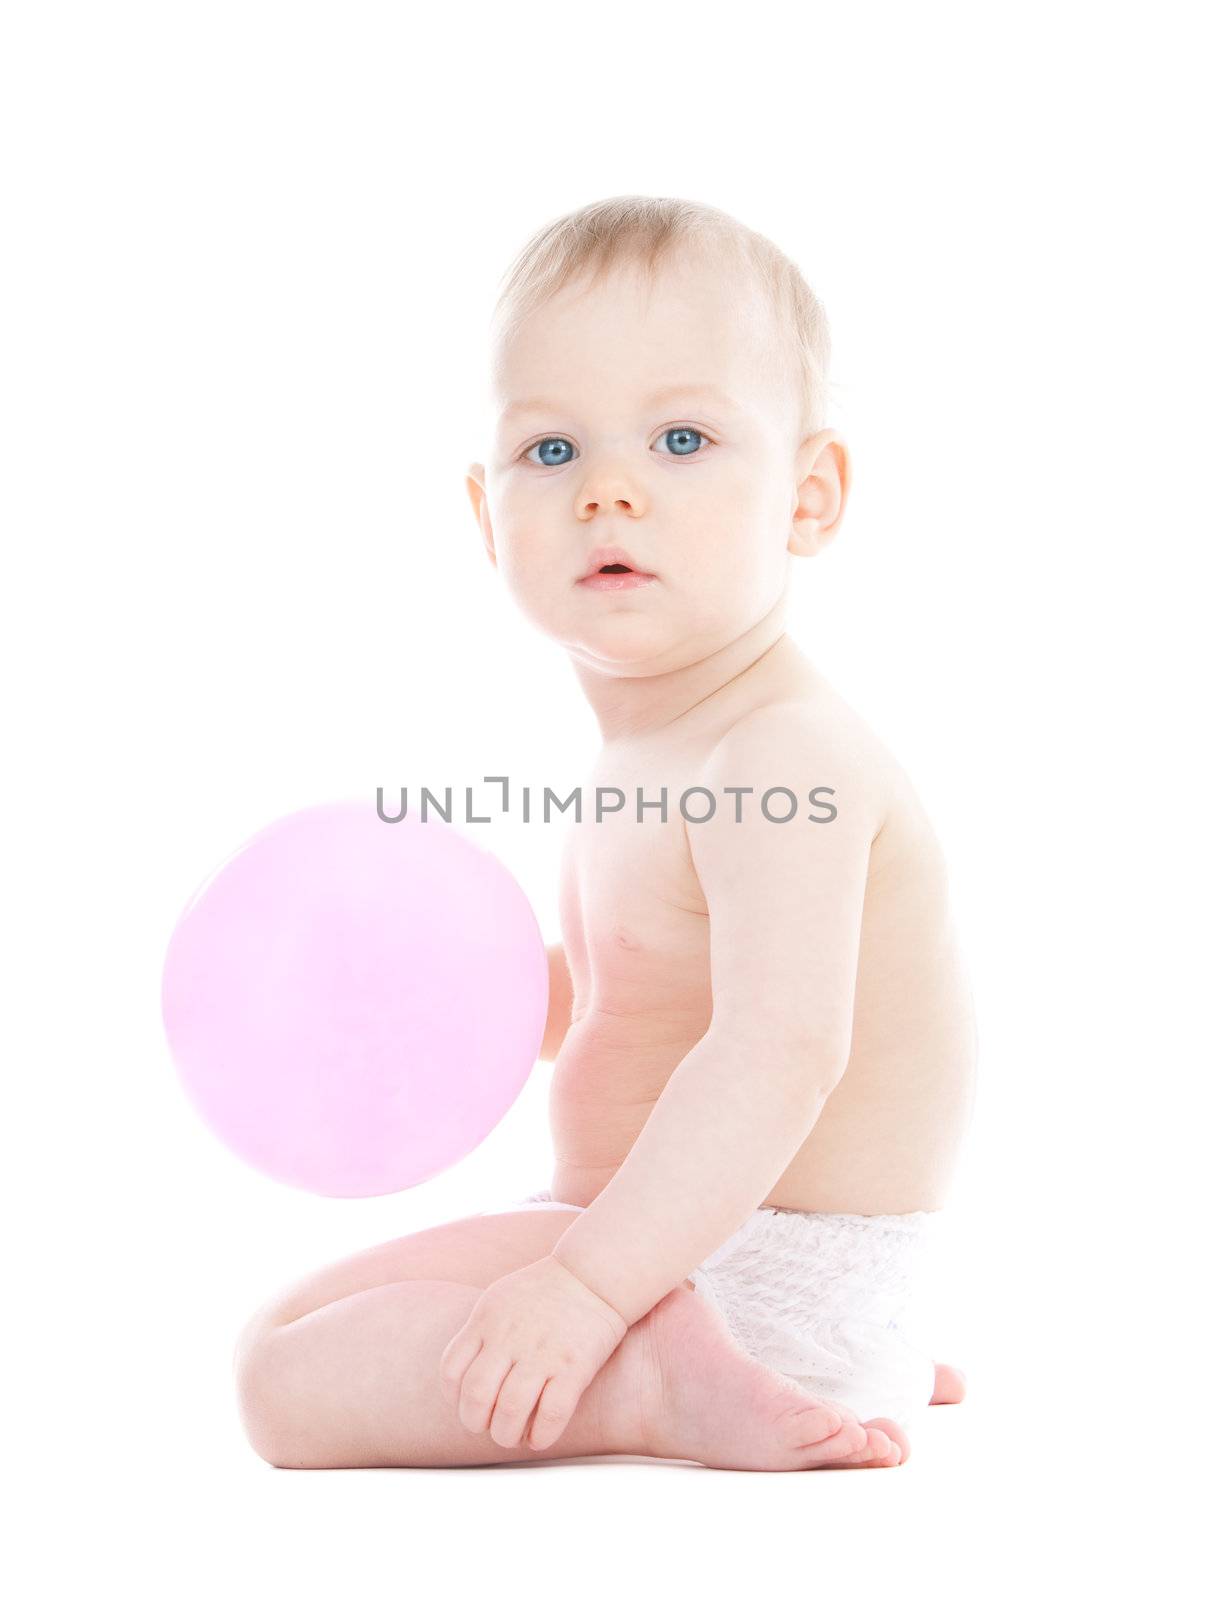 Baby with a balloon by mihhailov